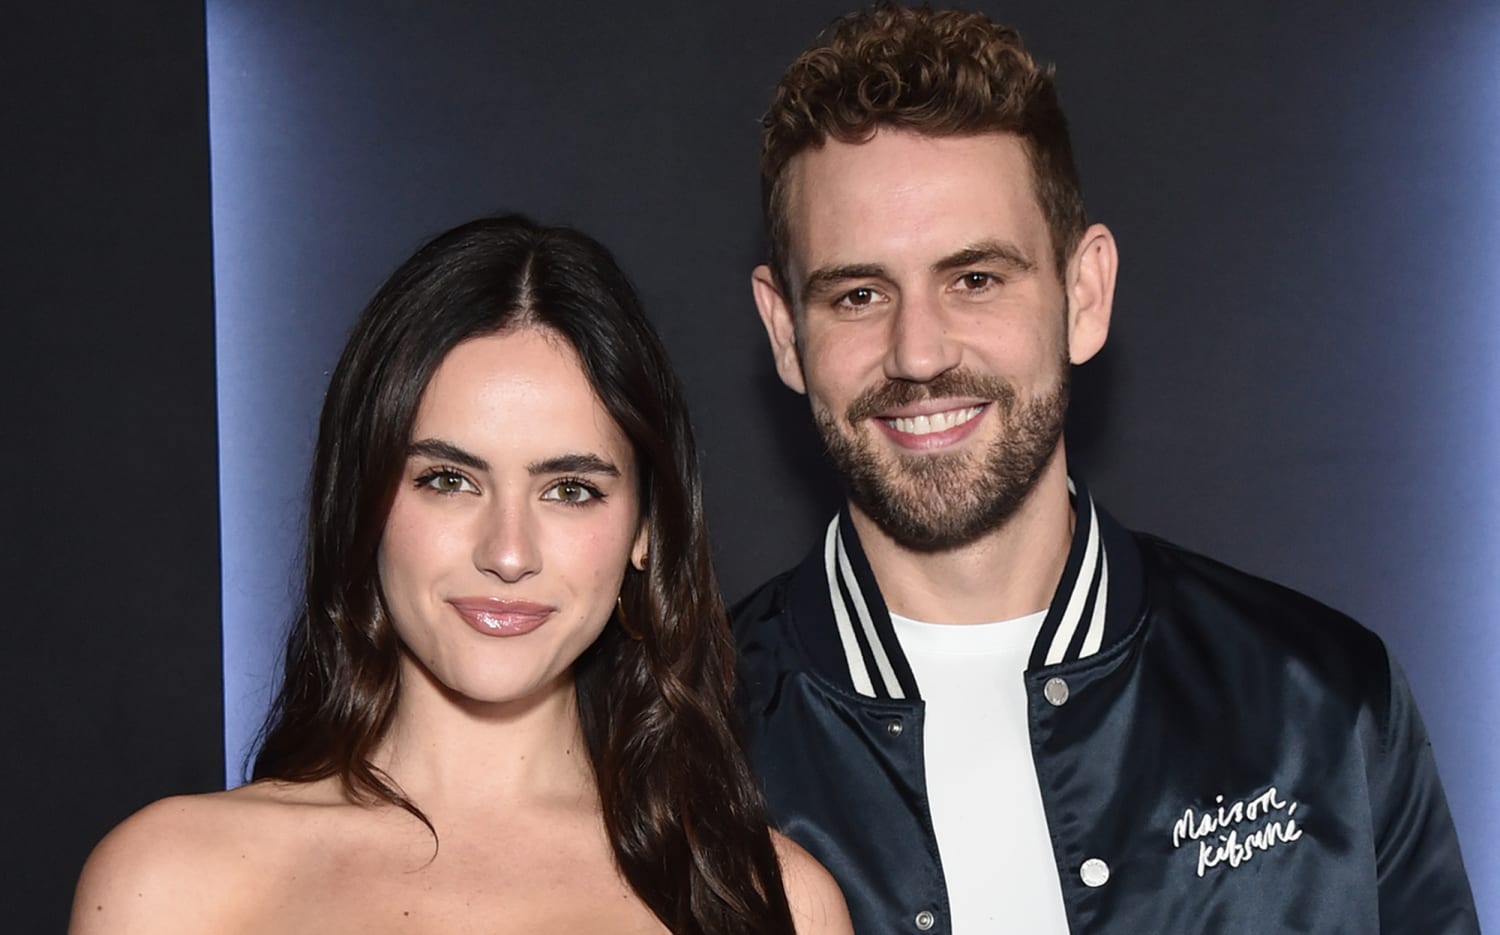 Nick Viall and Fiancée Natalie Joy Expecting First Baby A Look at Their Relationship